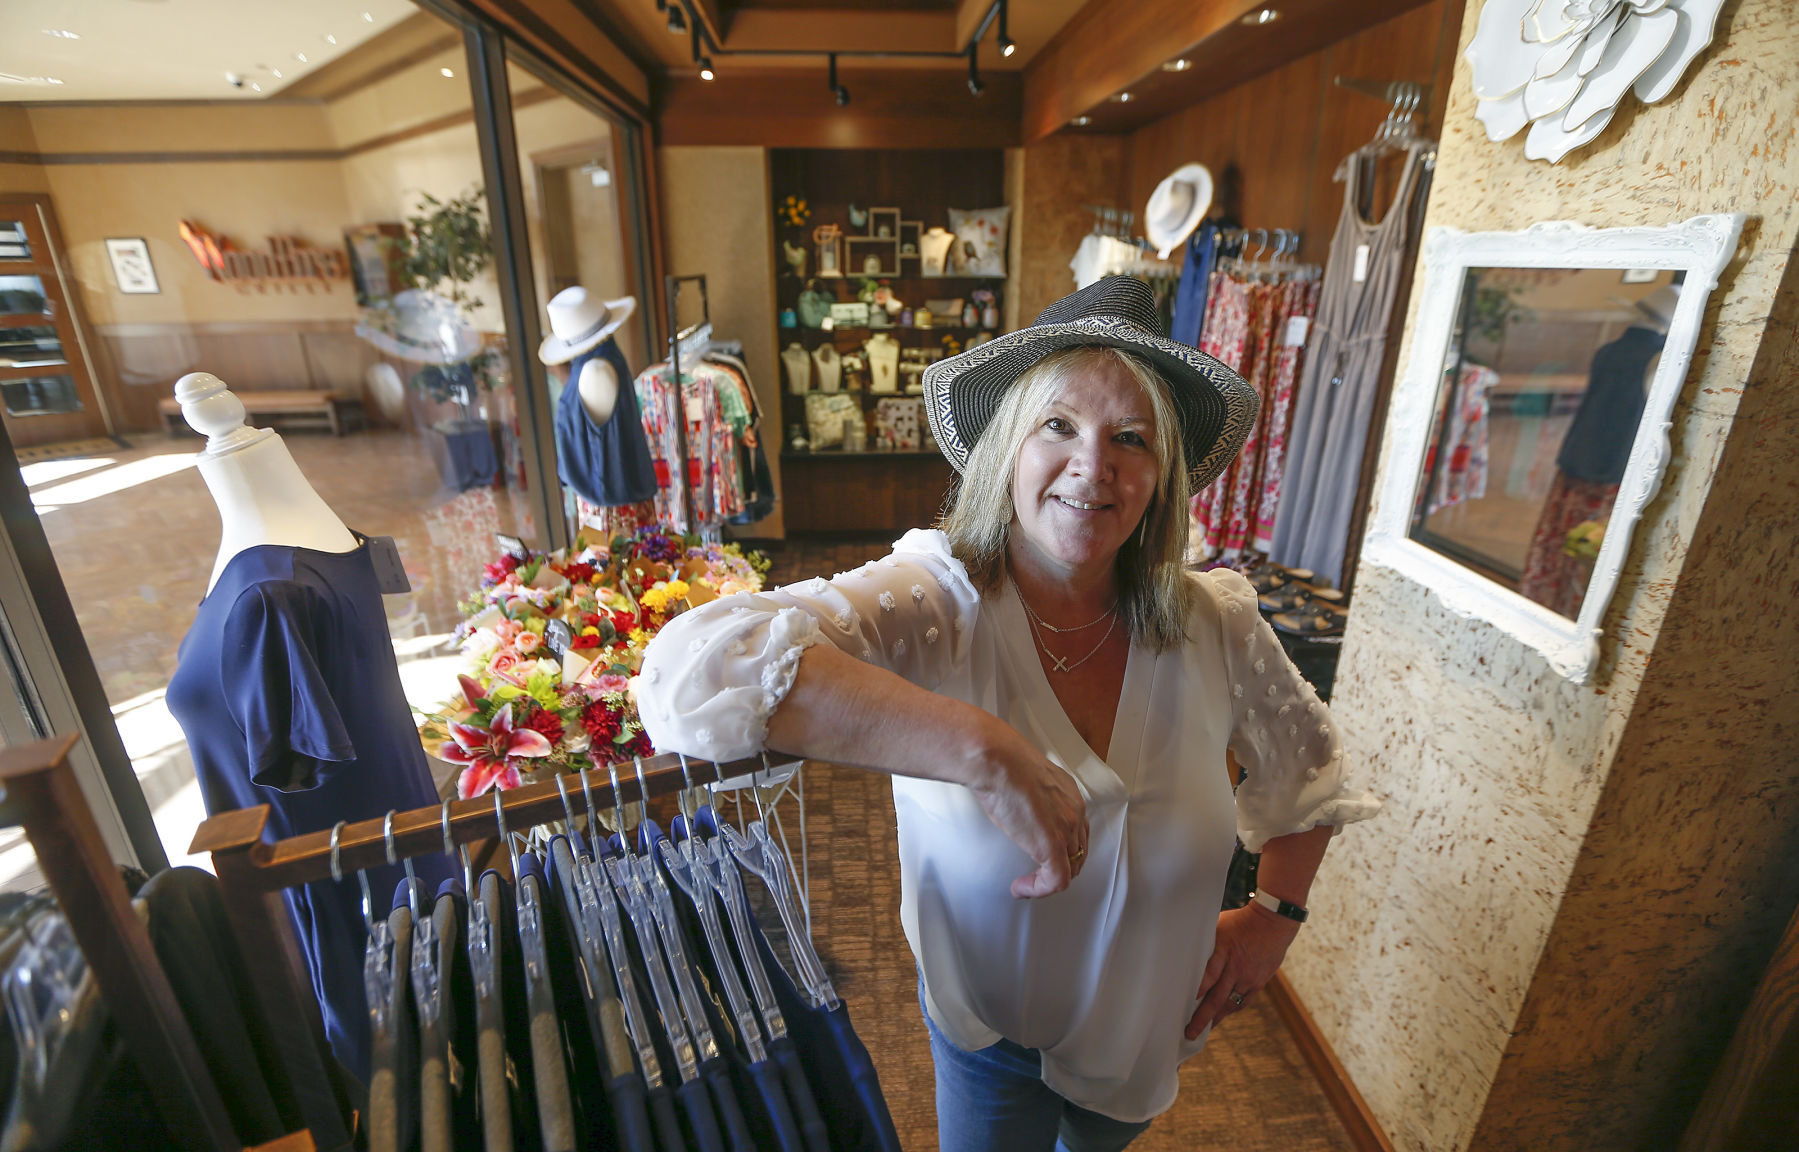 Tracy Gloeckner, owner of Dirt Road Darlings Boutique in Dubuque, recently opened her new satellite shop inside Diamond Jo Casino in Dubuque. The store sells a variety of women’s clothes and accessories.    PHOTO CREDIT: Dave Kettering